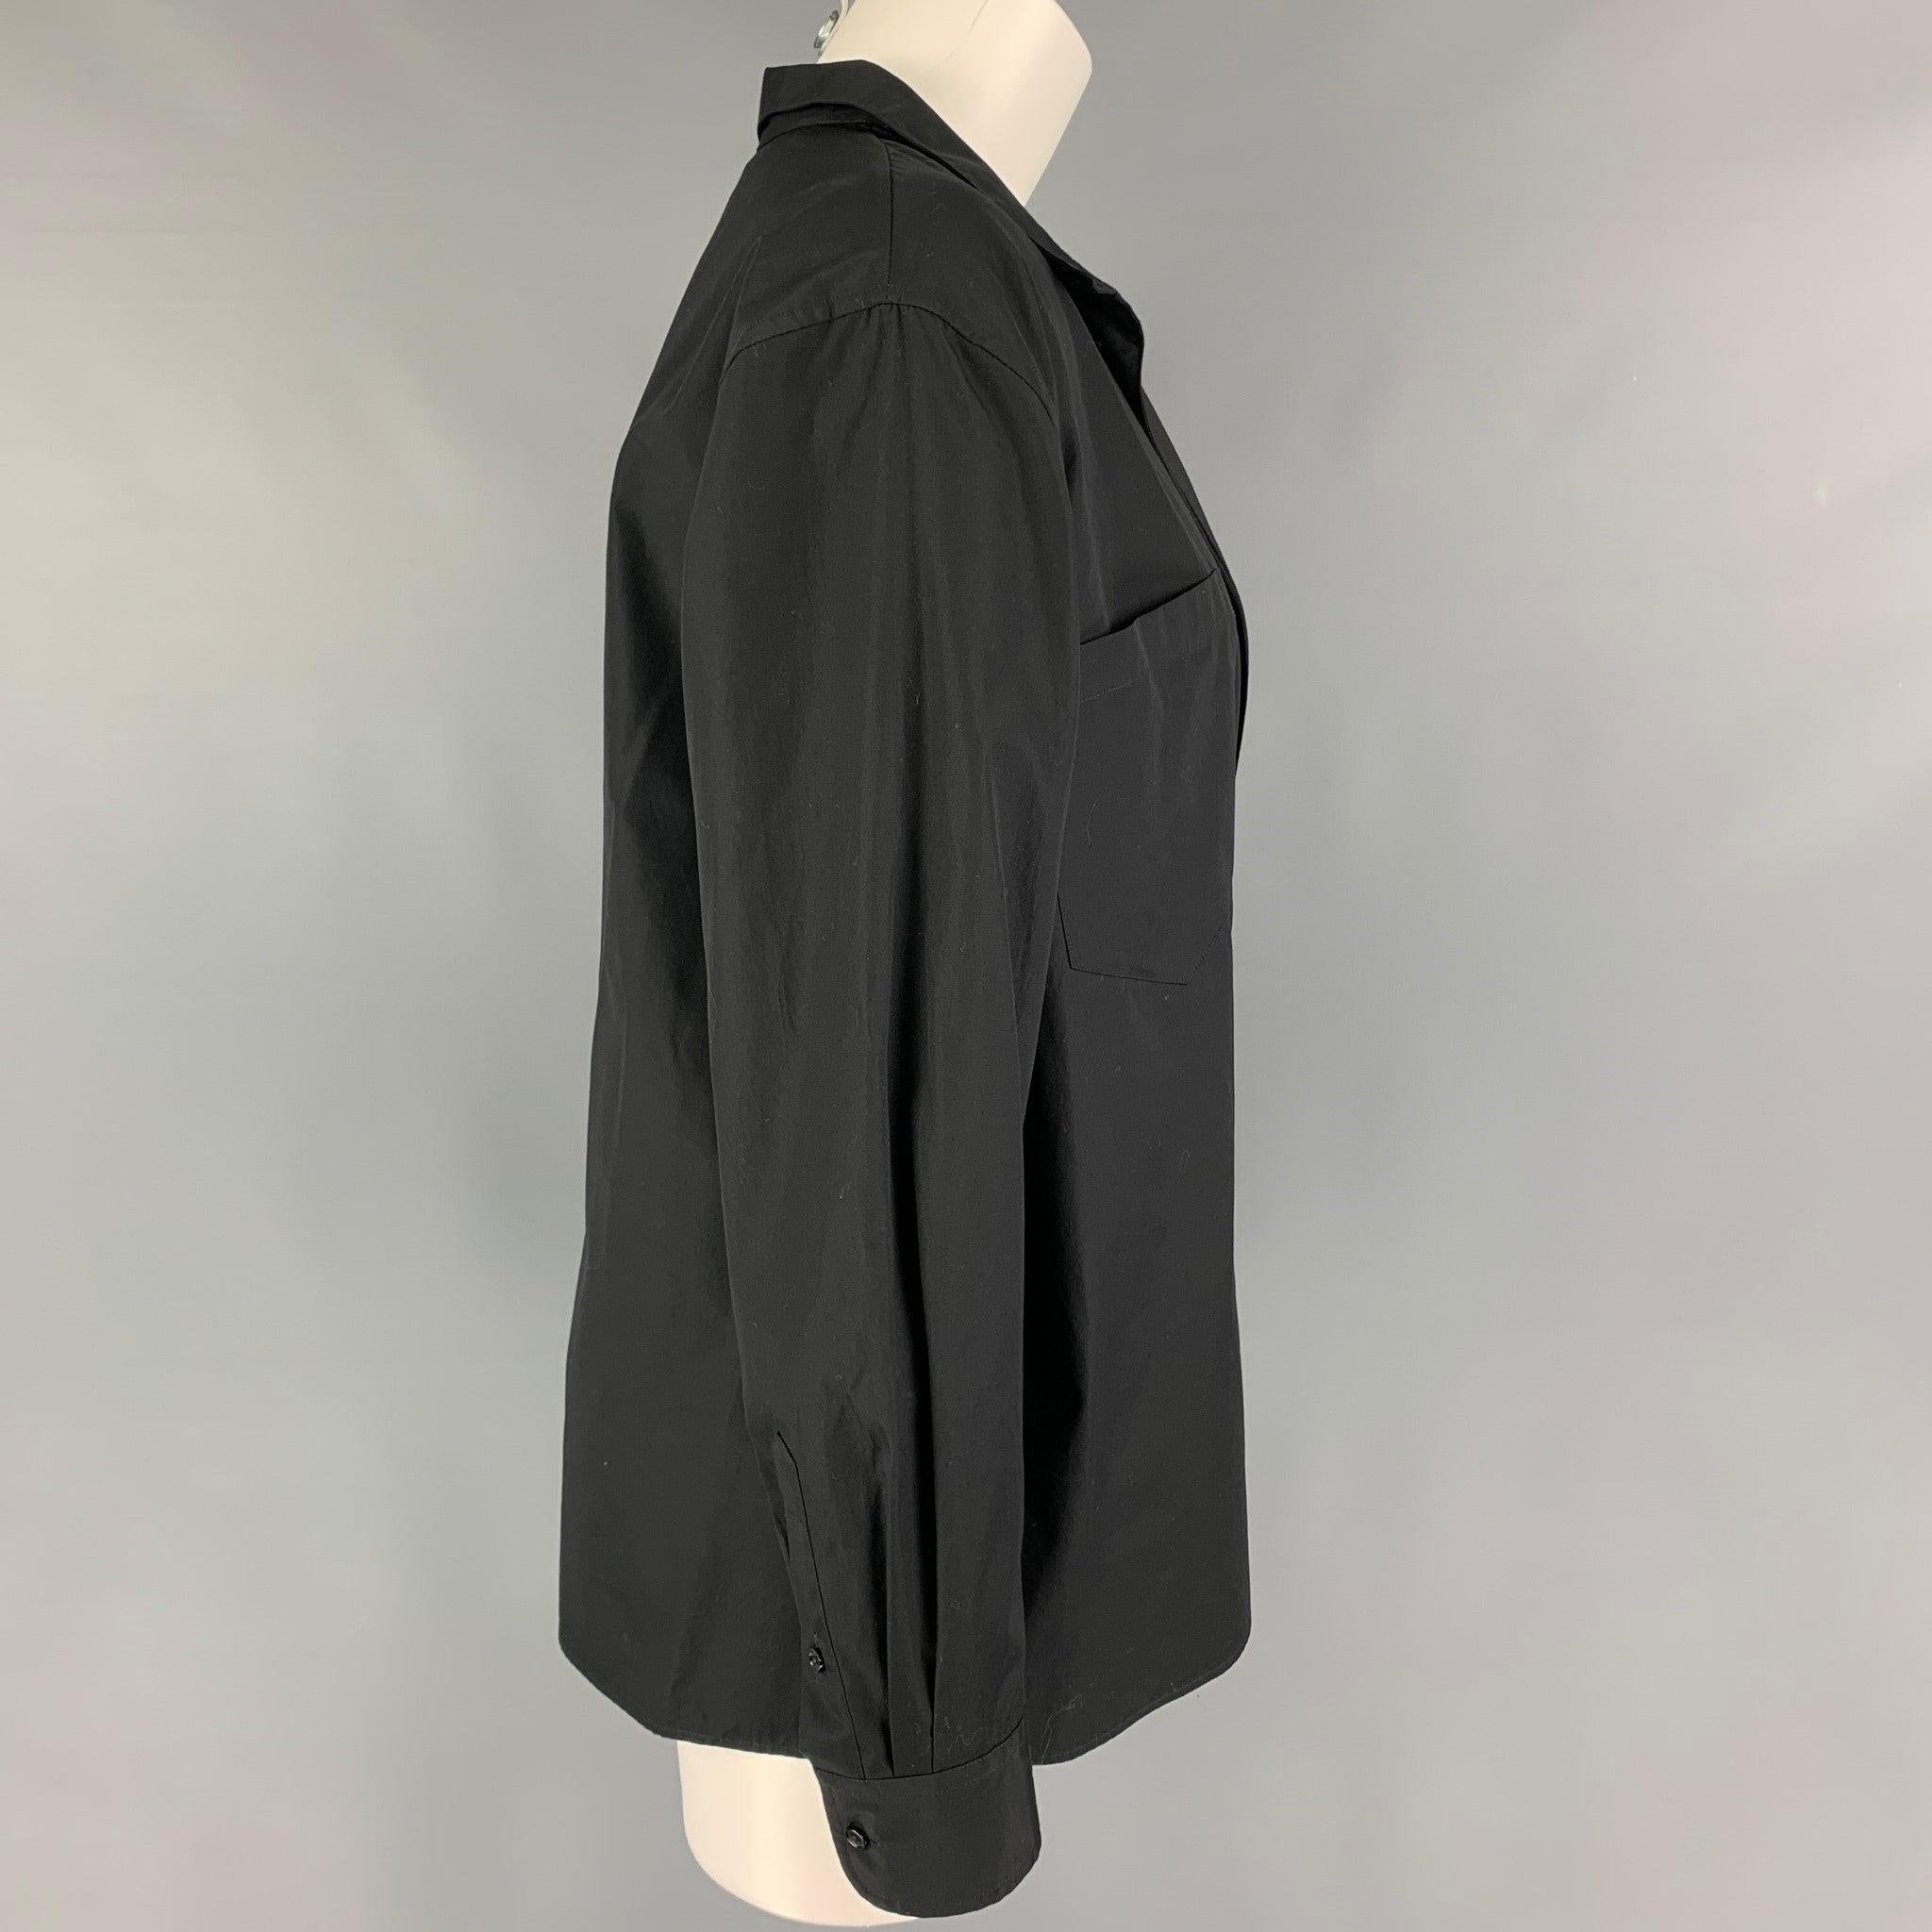 RALPH LAUREN Collection Size 6 Black Cotton Wrap Around Casual Top In Good Condition For Sale In San Francisco, CA